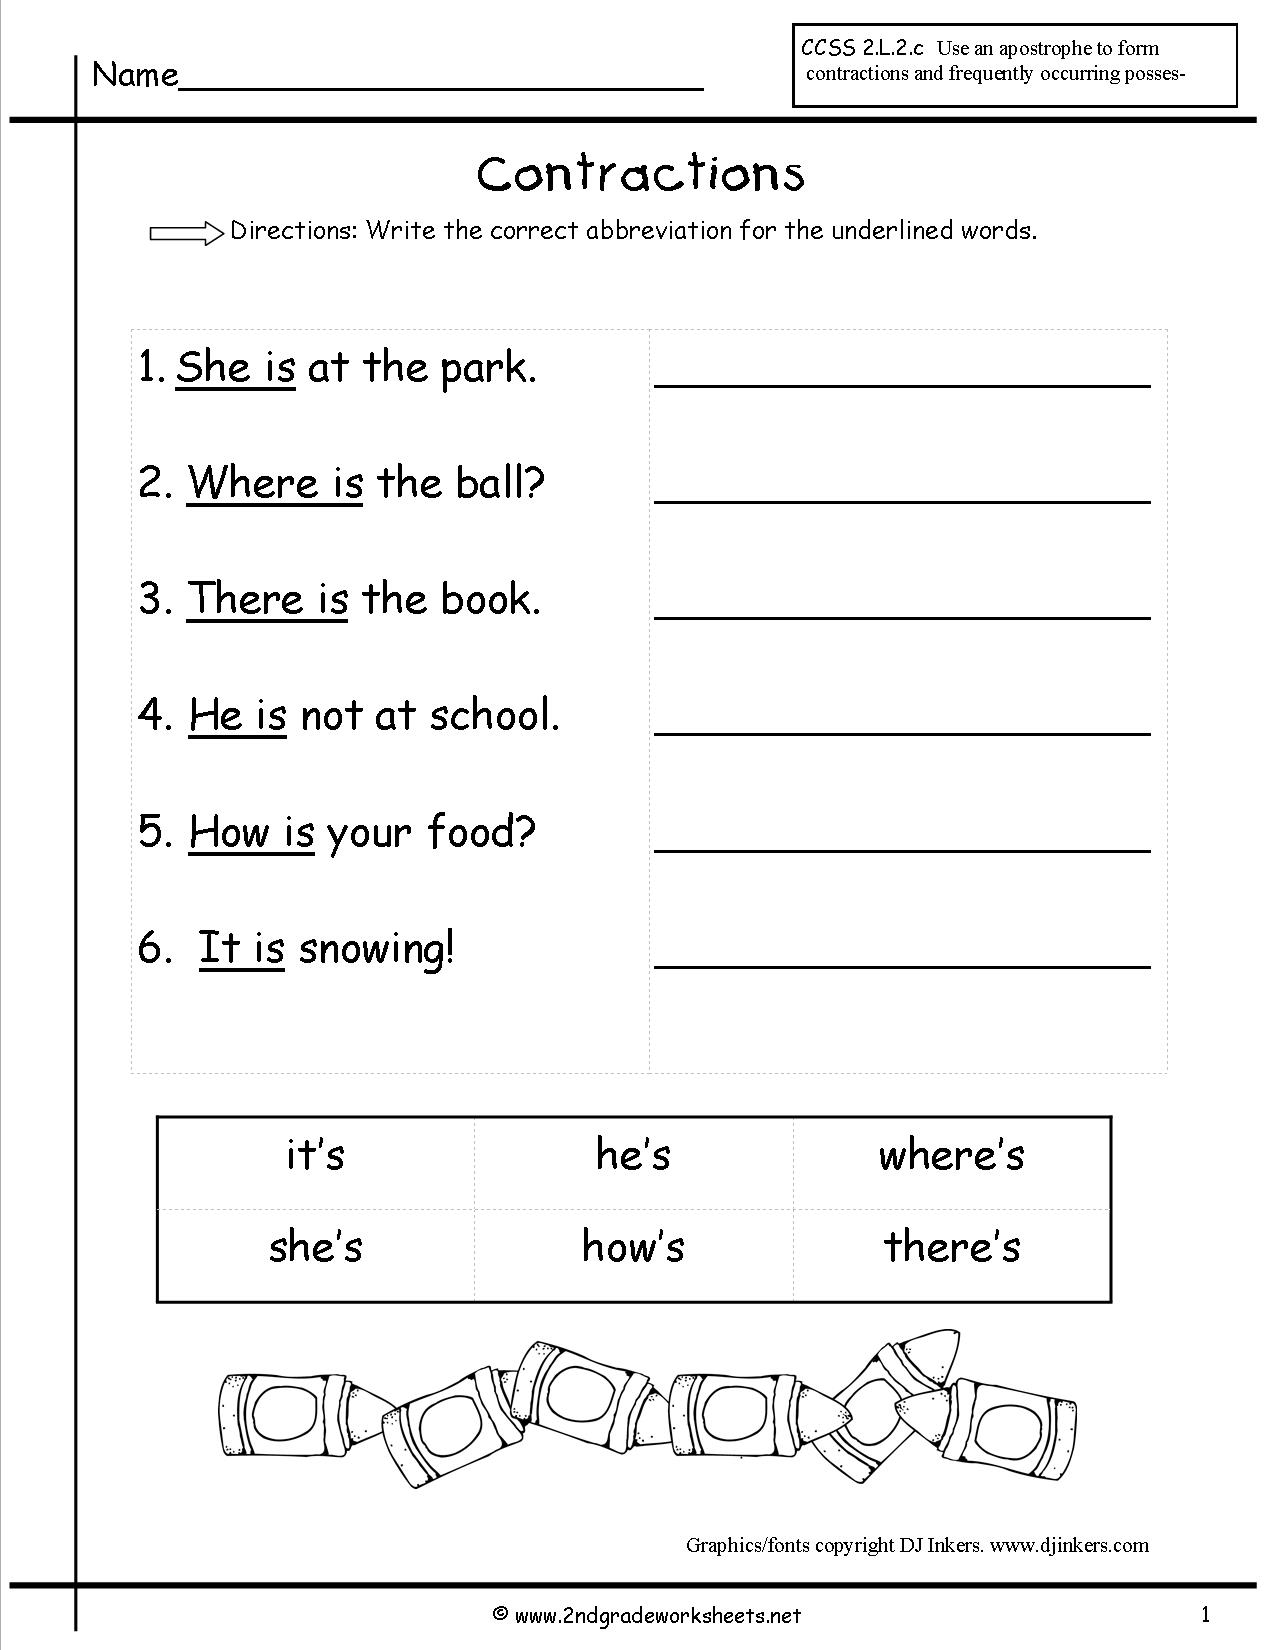 Free Contractions Worksheets And Printouts throughout Homework Pages For 1St Grade